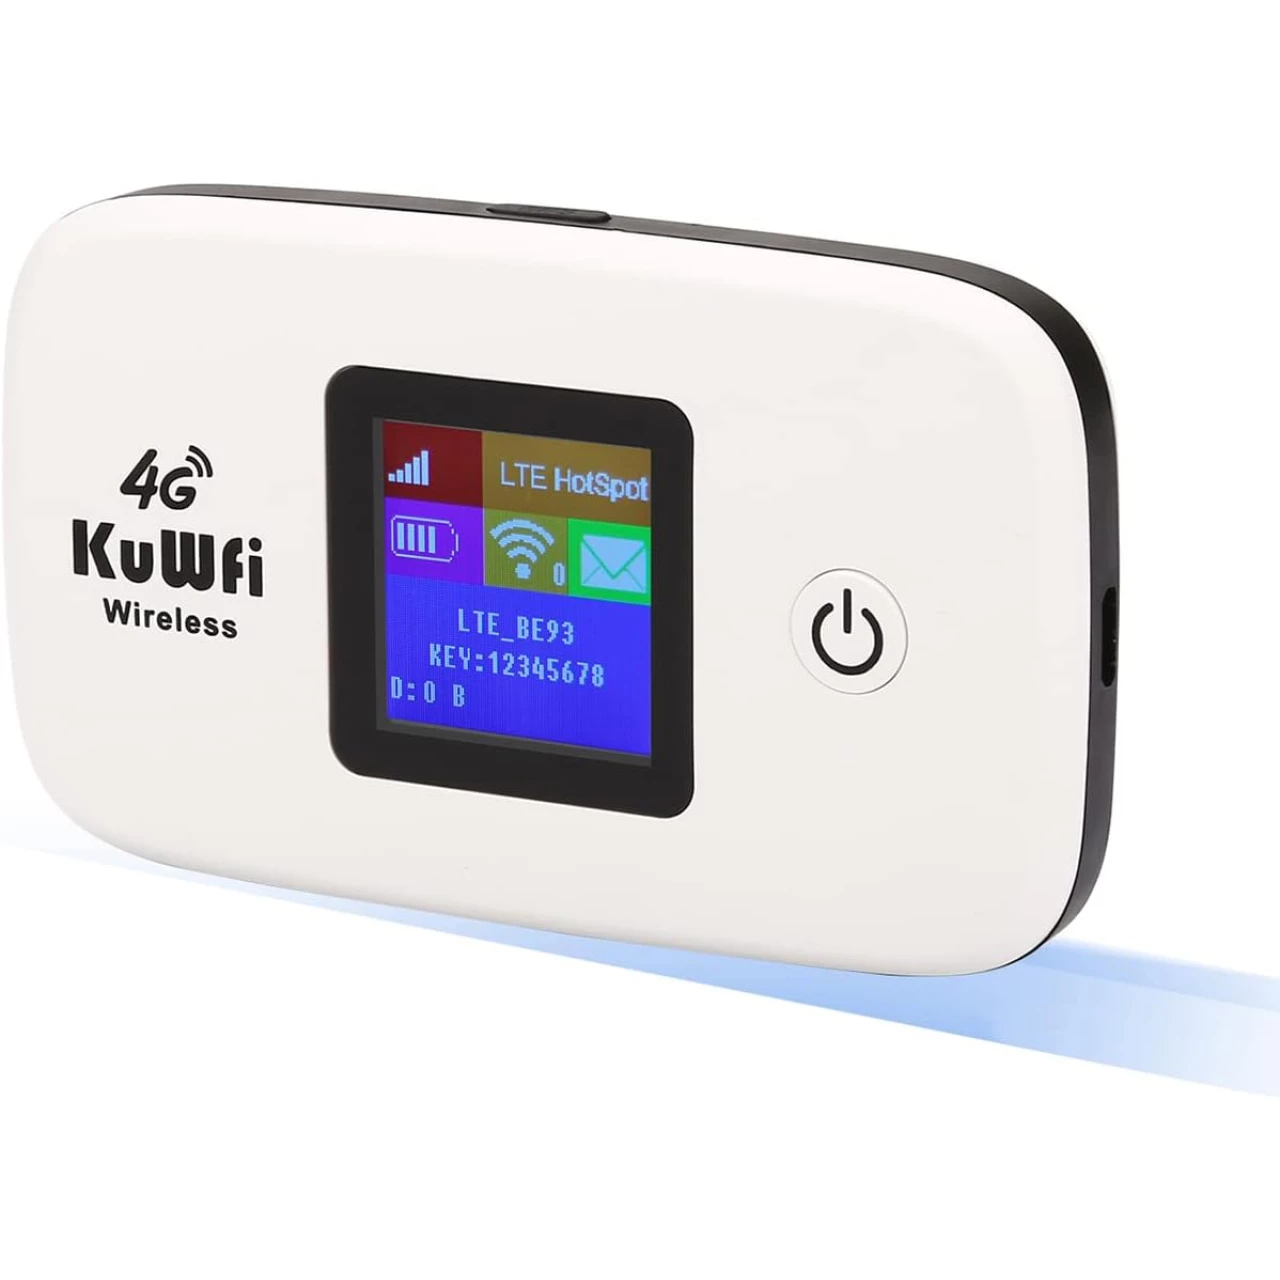 Mobile WiFi Hotspot | KuWFi 4G LTE Unlocked Wi-Fi Hotspot Device | Portable WiFi Router with SIM Card Slot for Travel Support B2/B4/B5/B12/B17 for AT&amp;T/T-Mobile